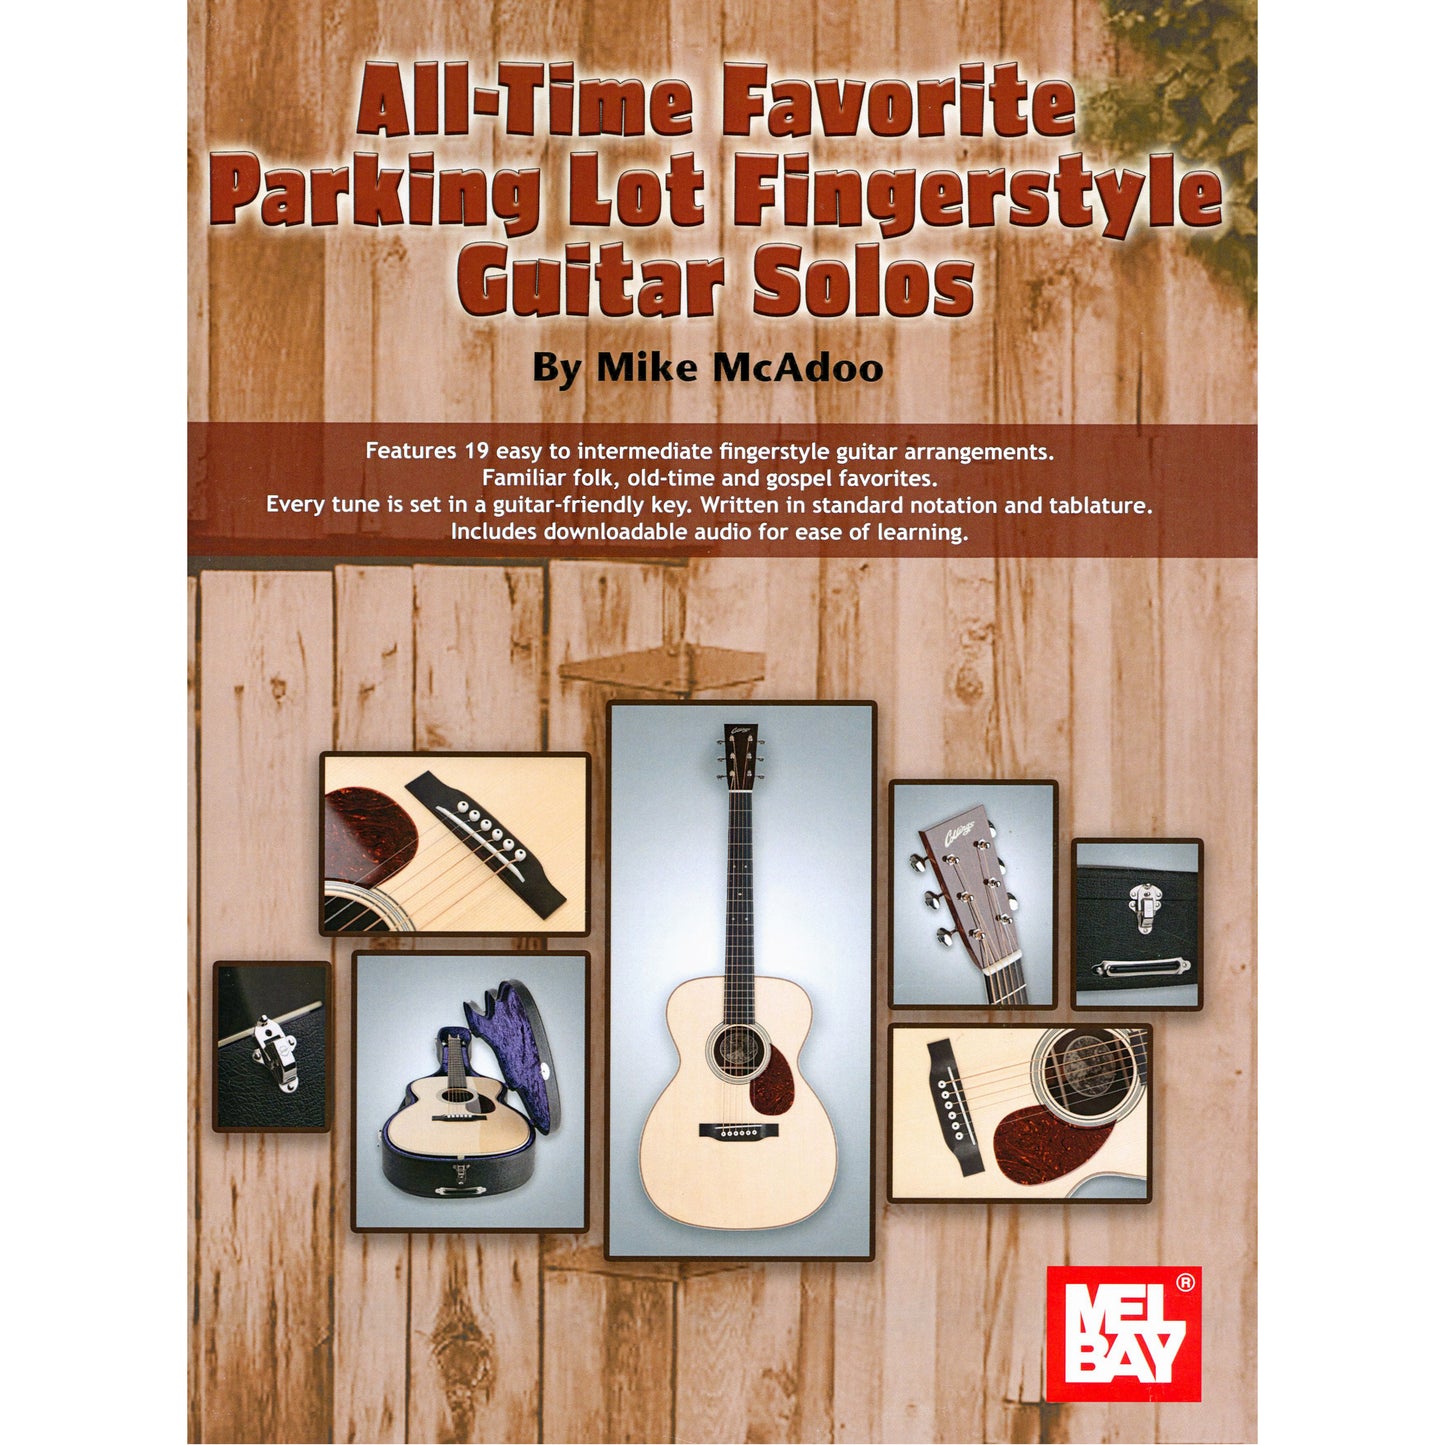 Image 1 : Cover of All-Time Favorite Parking Lot Fingerstyle Guitar Solos by Mike McAdoo SKU: 02-31091M